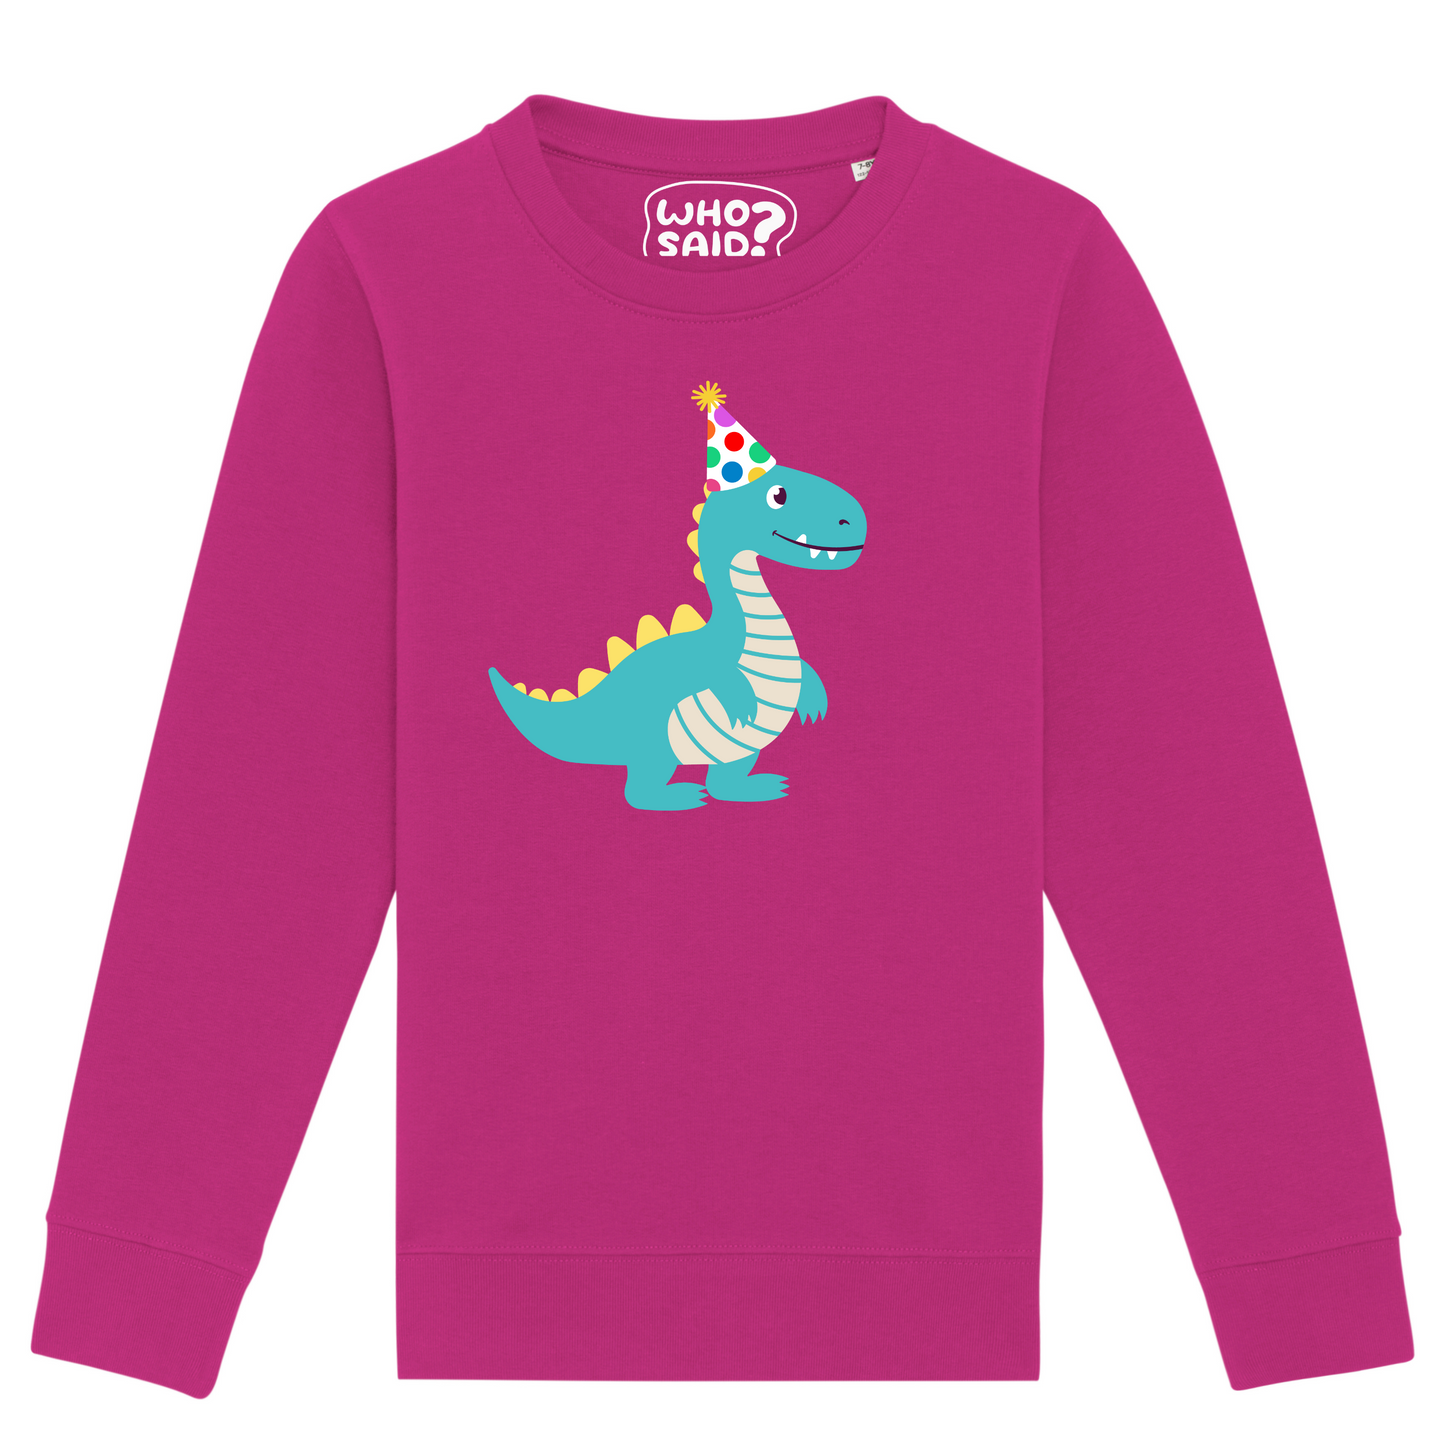 Who said - Sweater - Dinosaurier